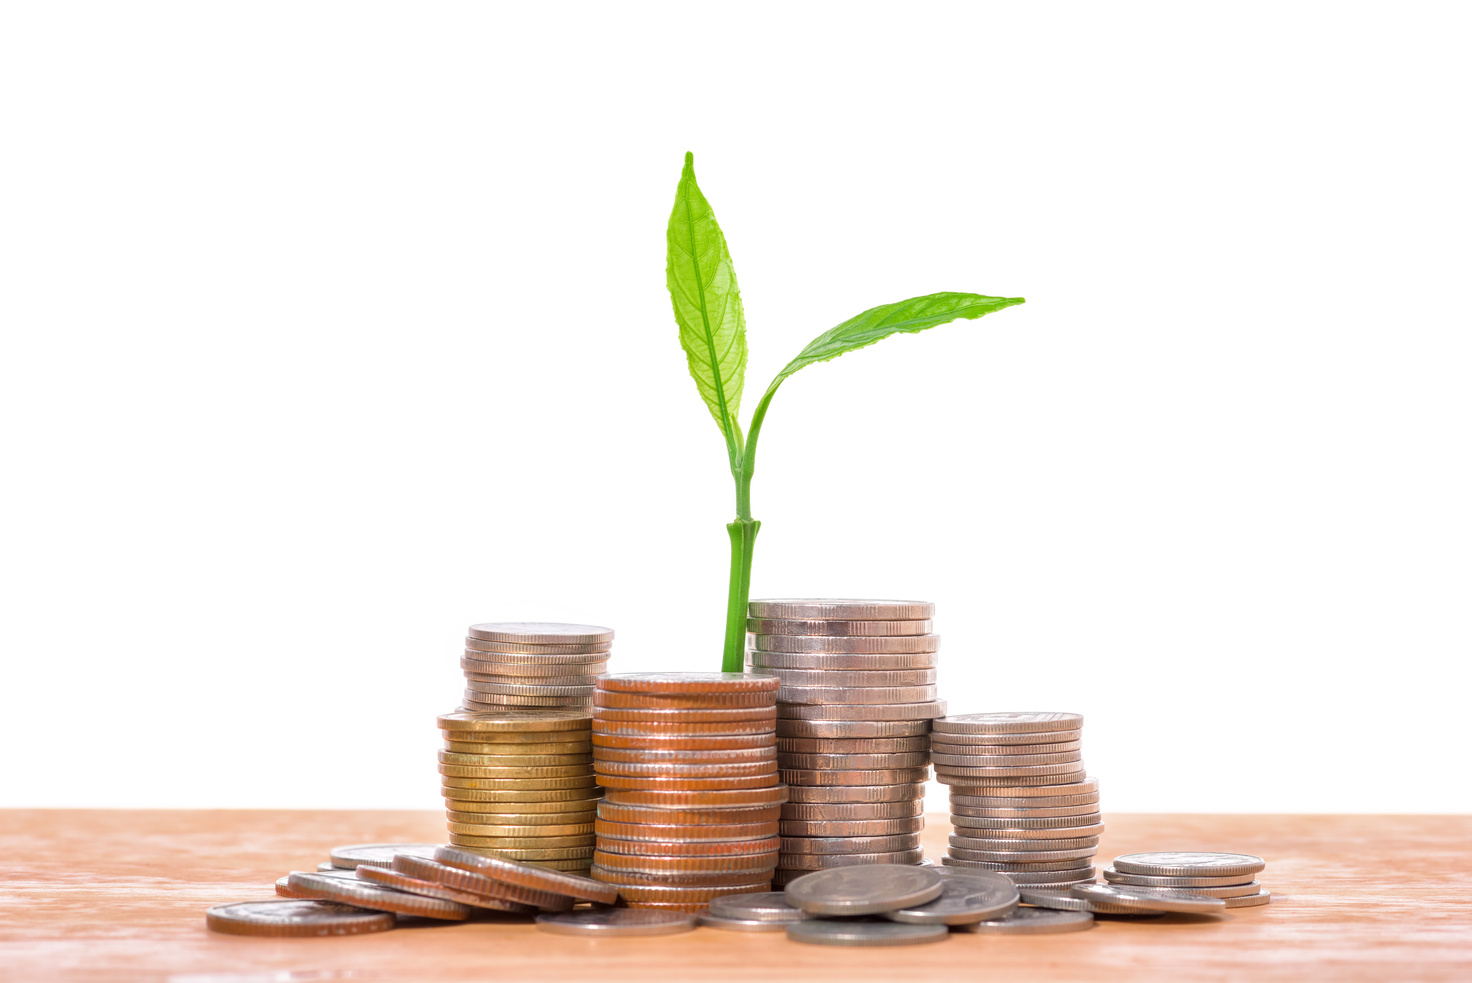 Plant growing in savings coins - money saving concept